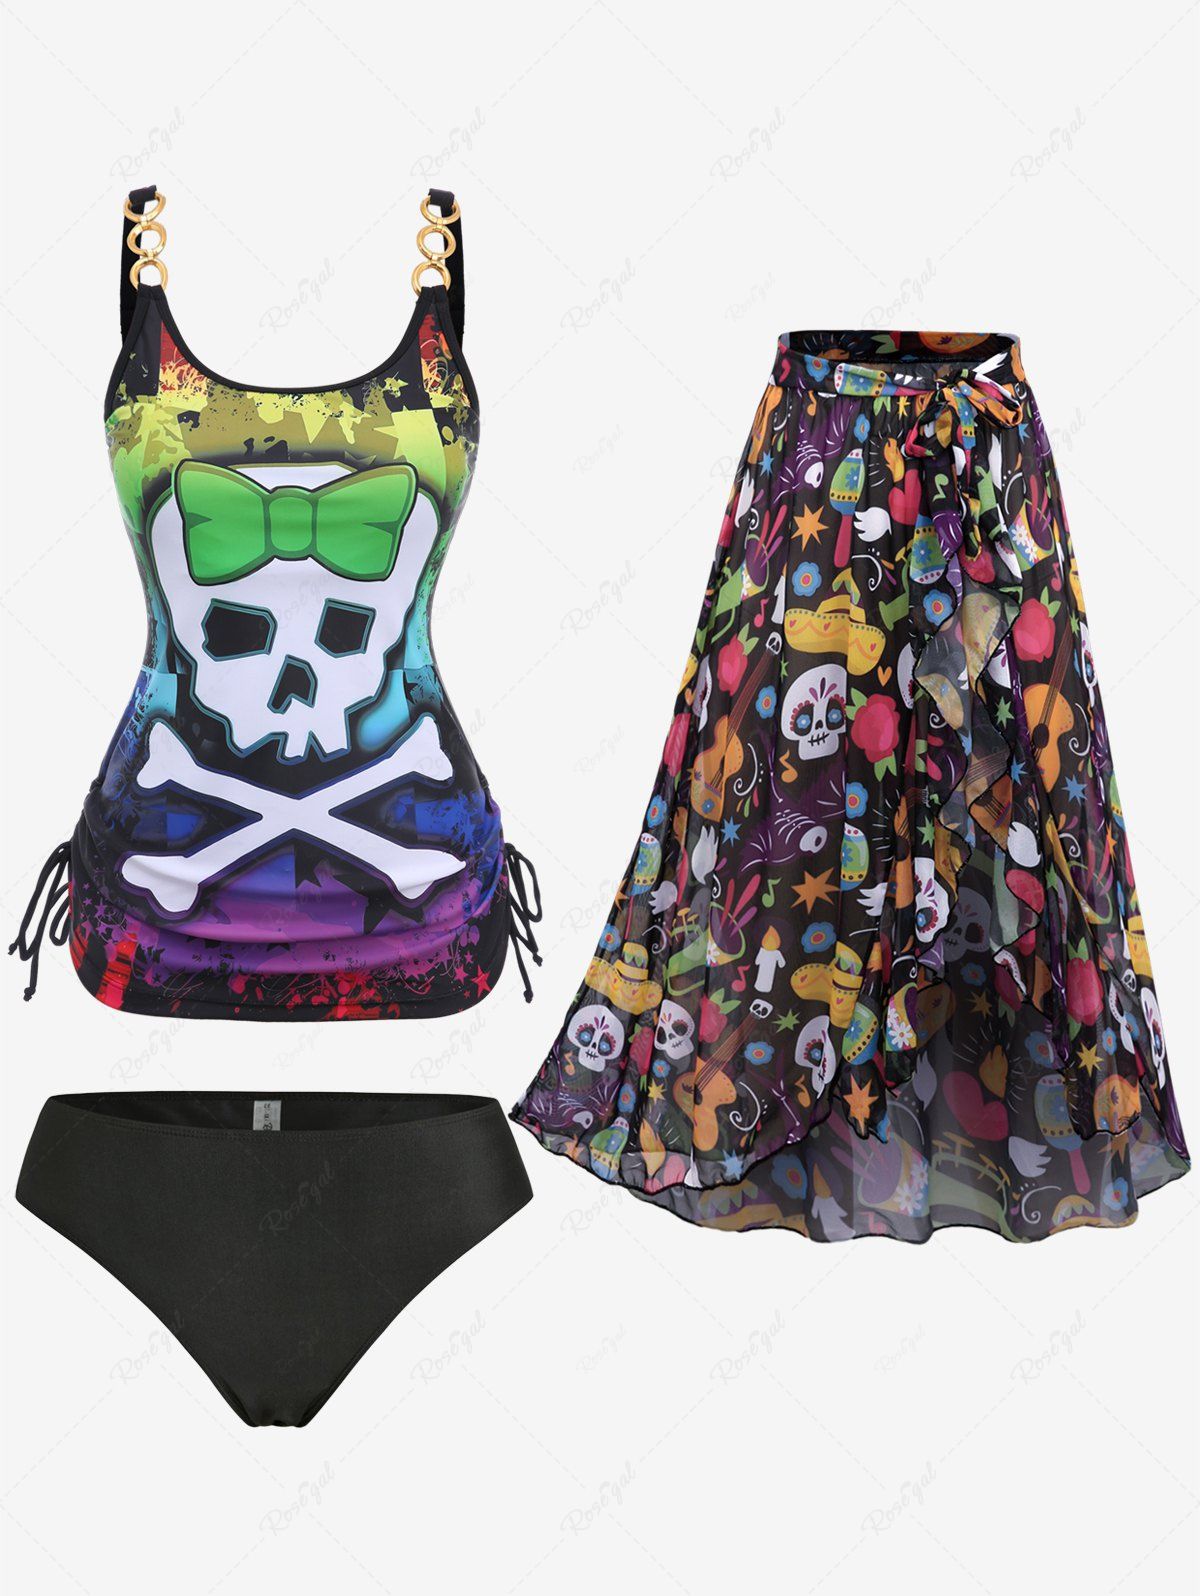 Sale Skull Bowknot Colorblock Painting Splatter Print Cinched Top and Bottom Tankini Set and Floral Mesh Wrap Flounce Asymmetric Sarong Three Piece Swimsuit  